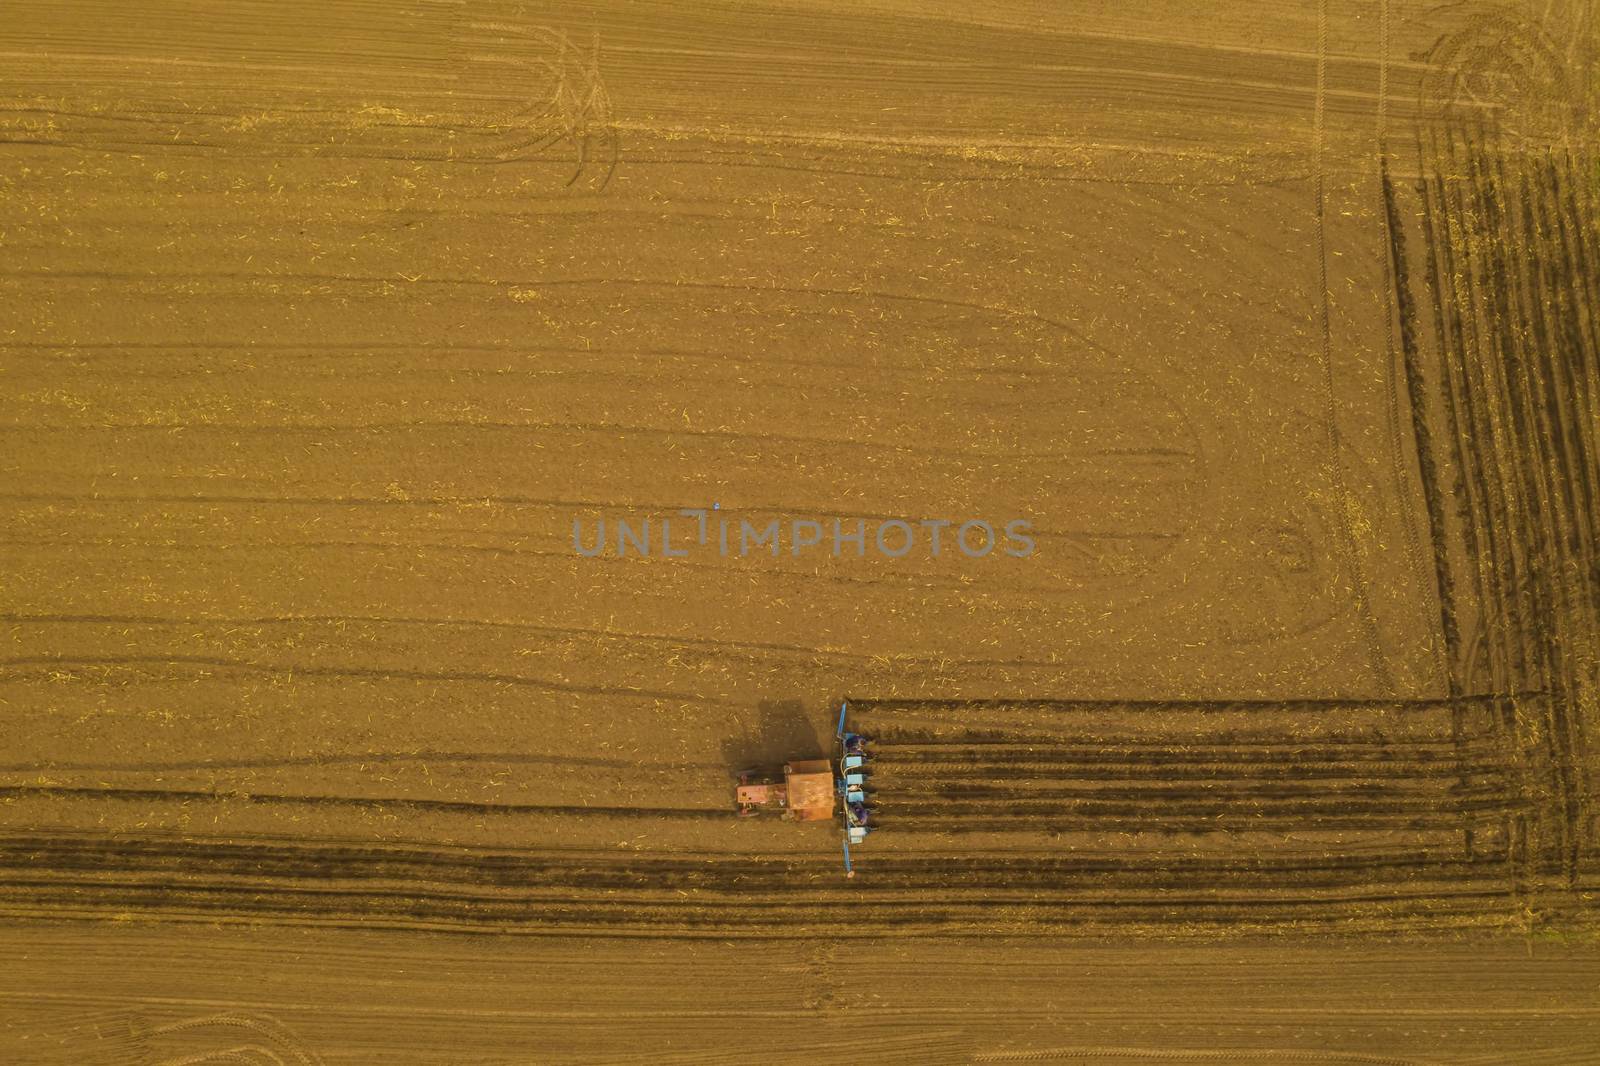 Above view of working traktor on spring field, agriculture machinery